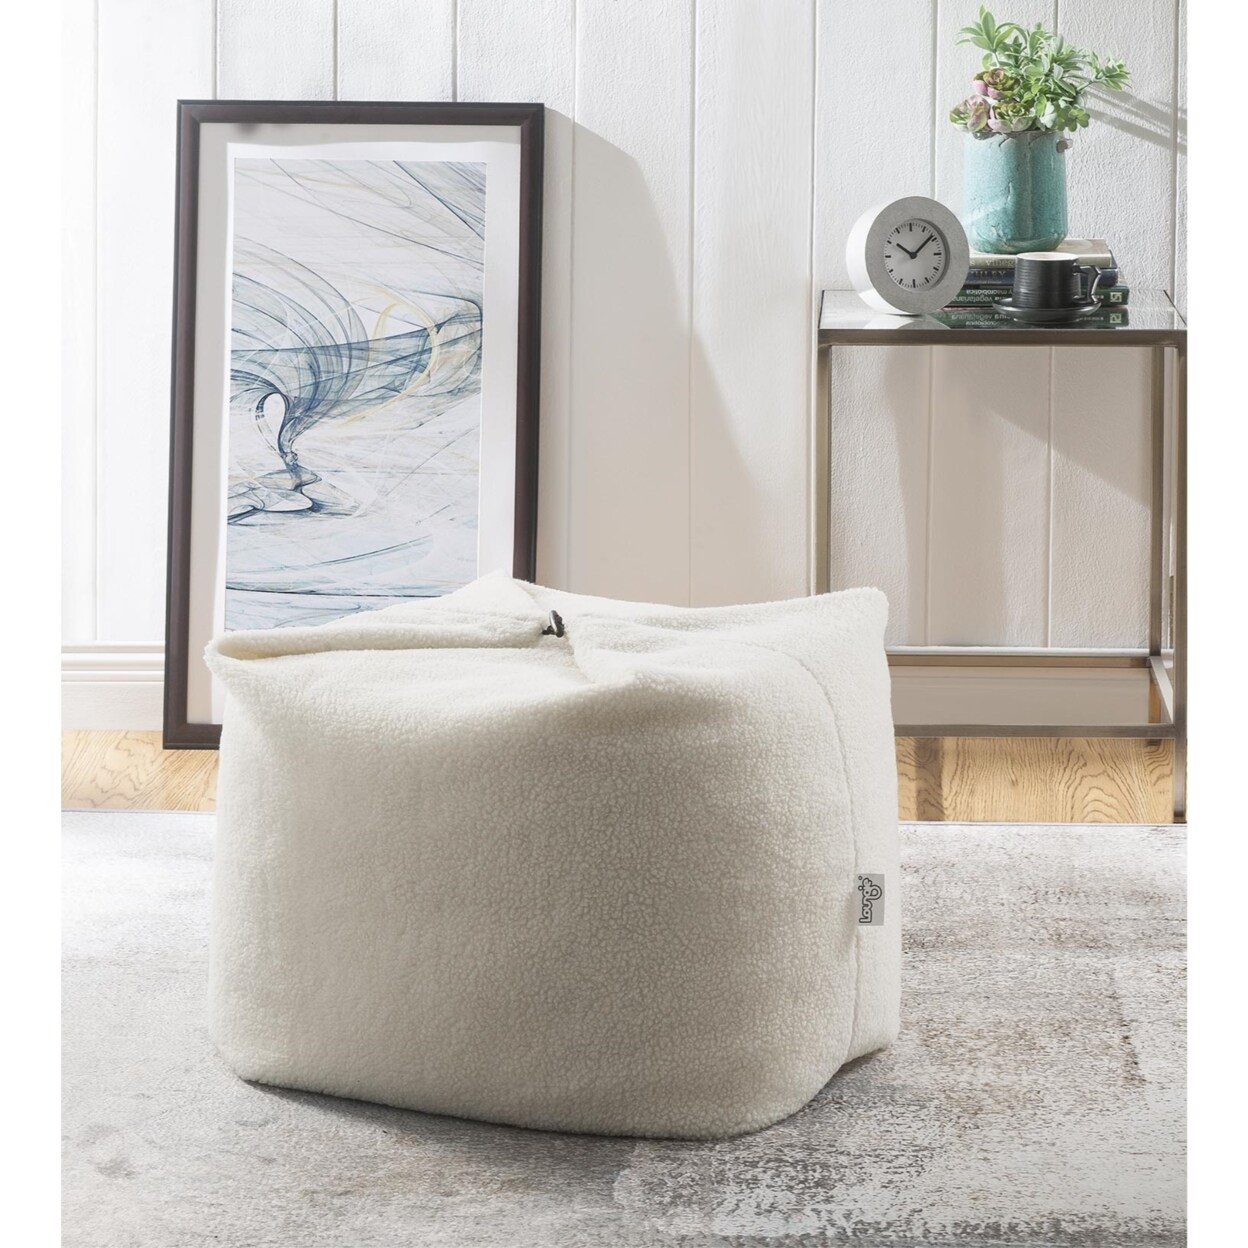 Loungie  ? Magic Pouf Beanbag-Linen or Sherpa Fabric-3-in-1 Convertible Ottoman + Chair + Floor Pillow-Modern and